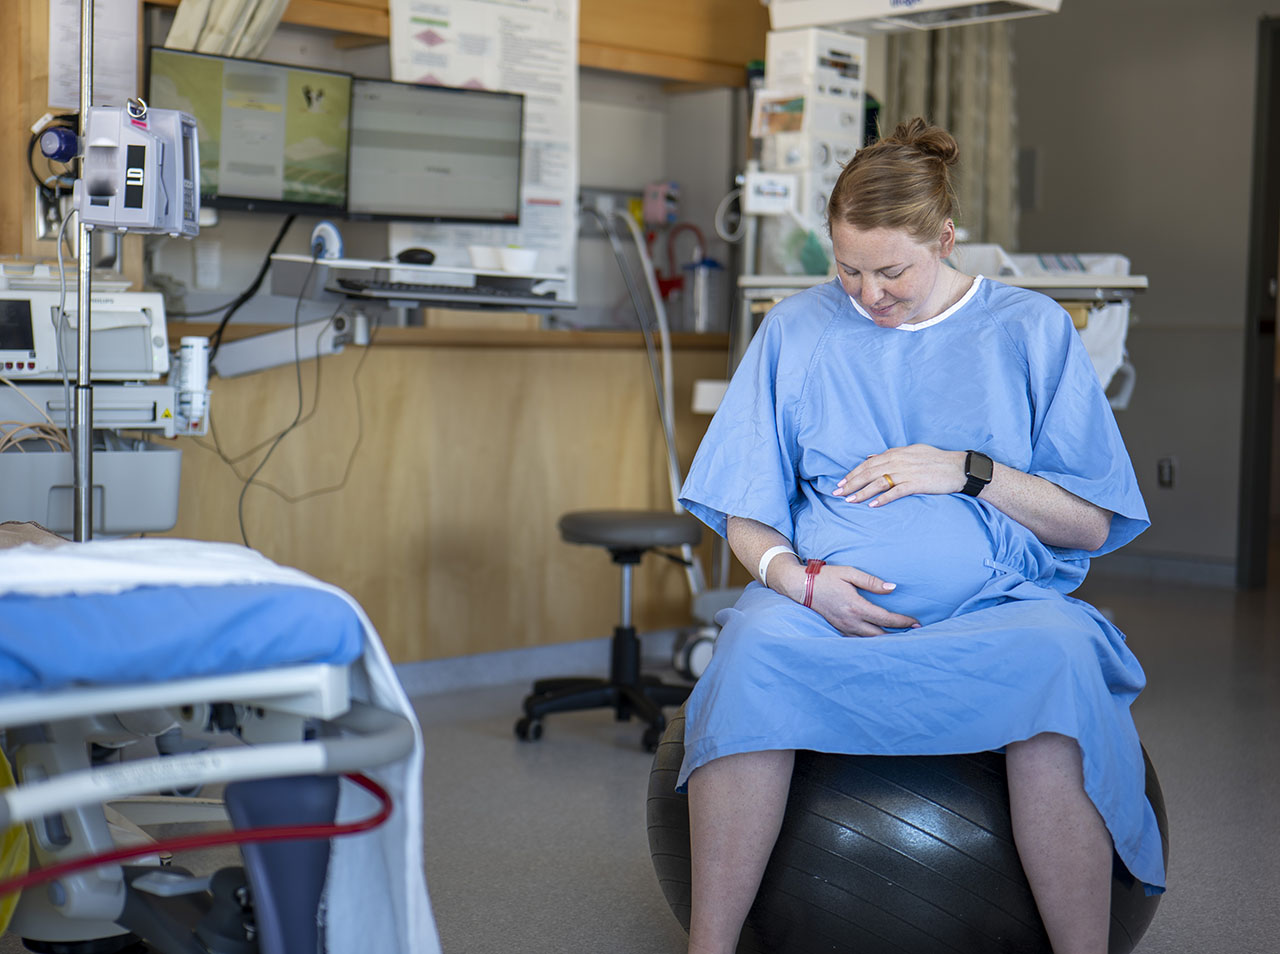 What Are Birthing Balls and Peanut Balls, and Do They Make Labor Easier?